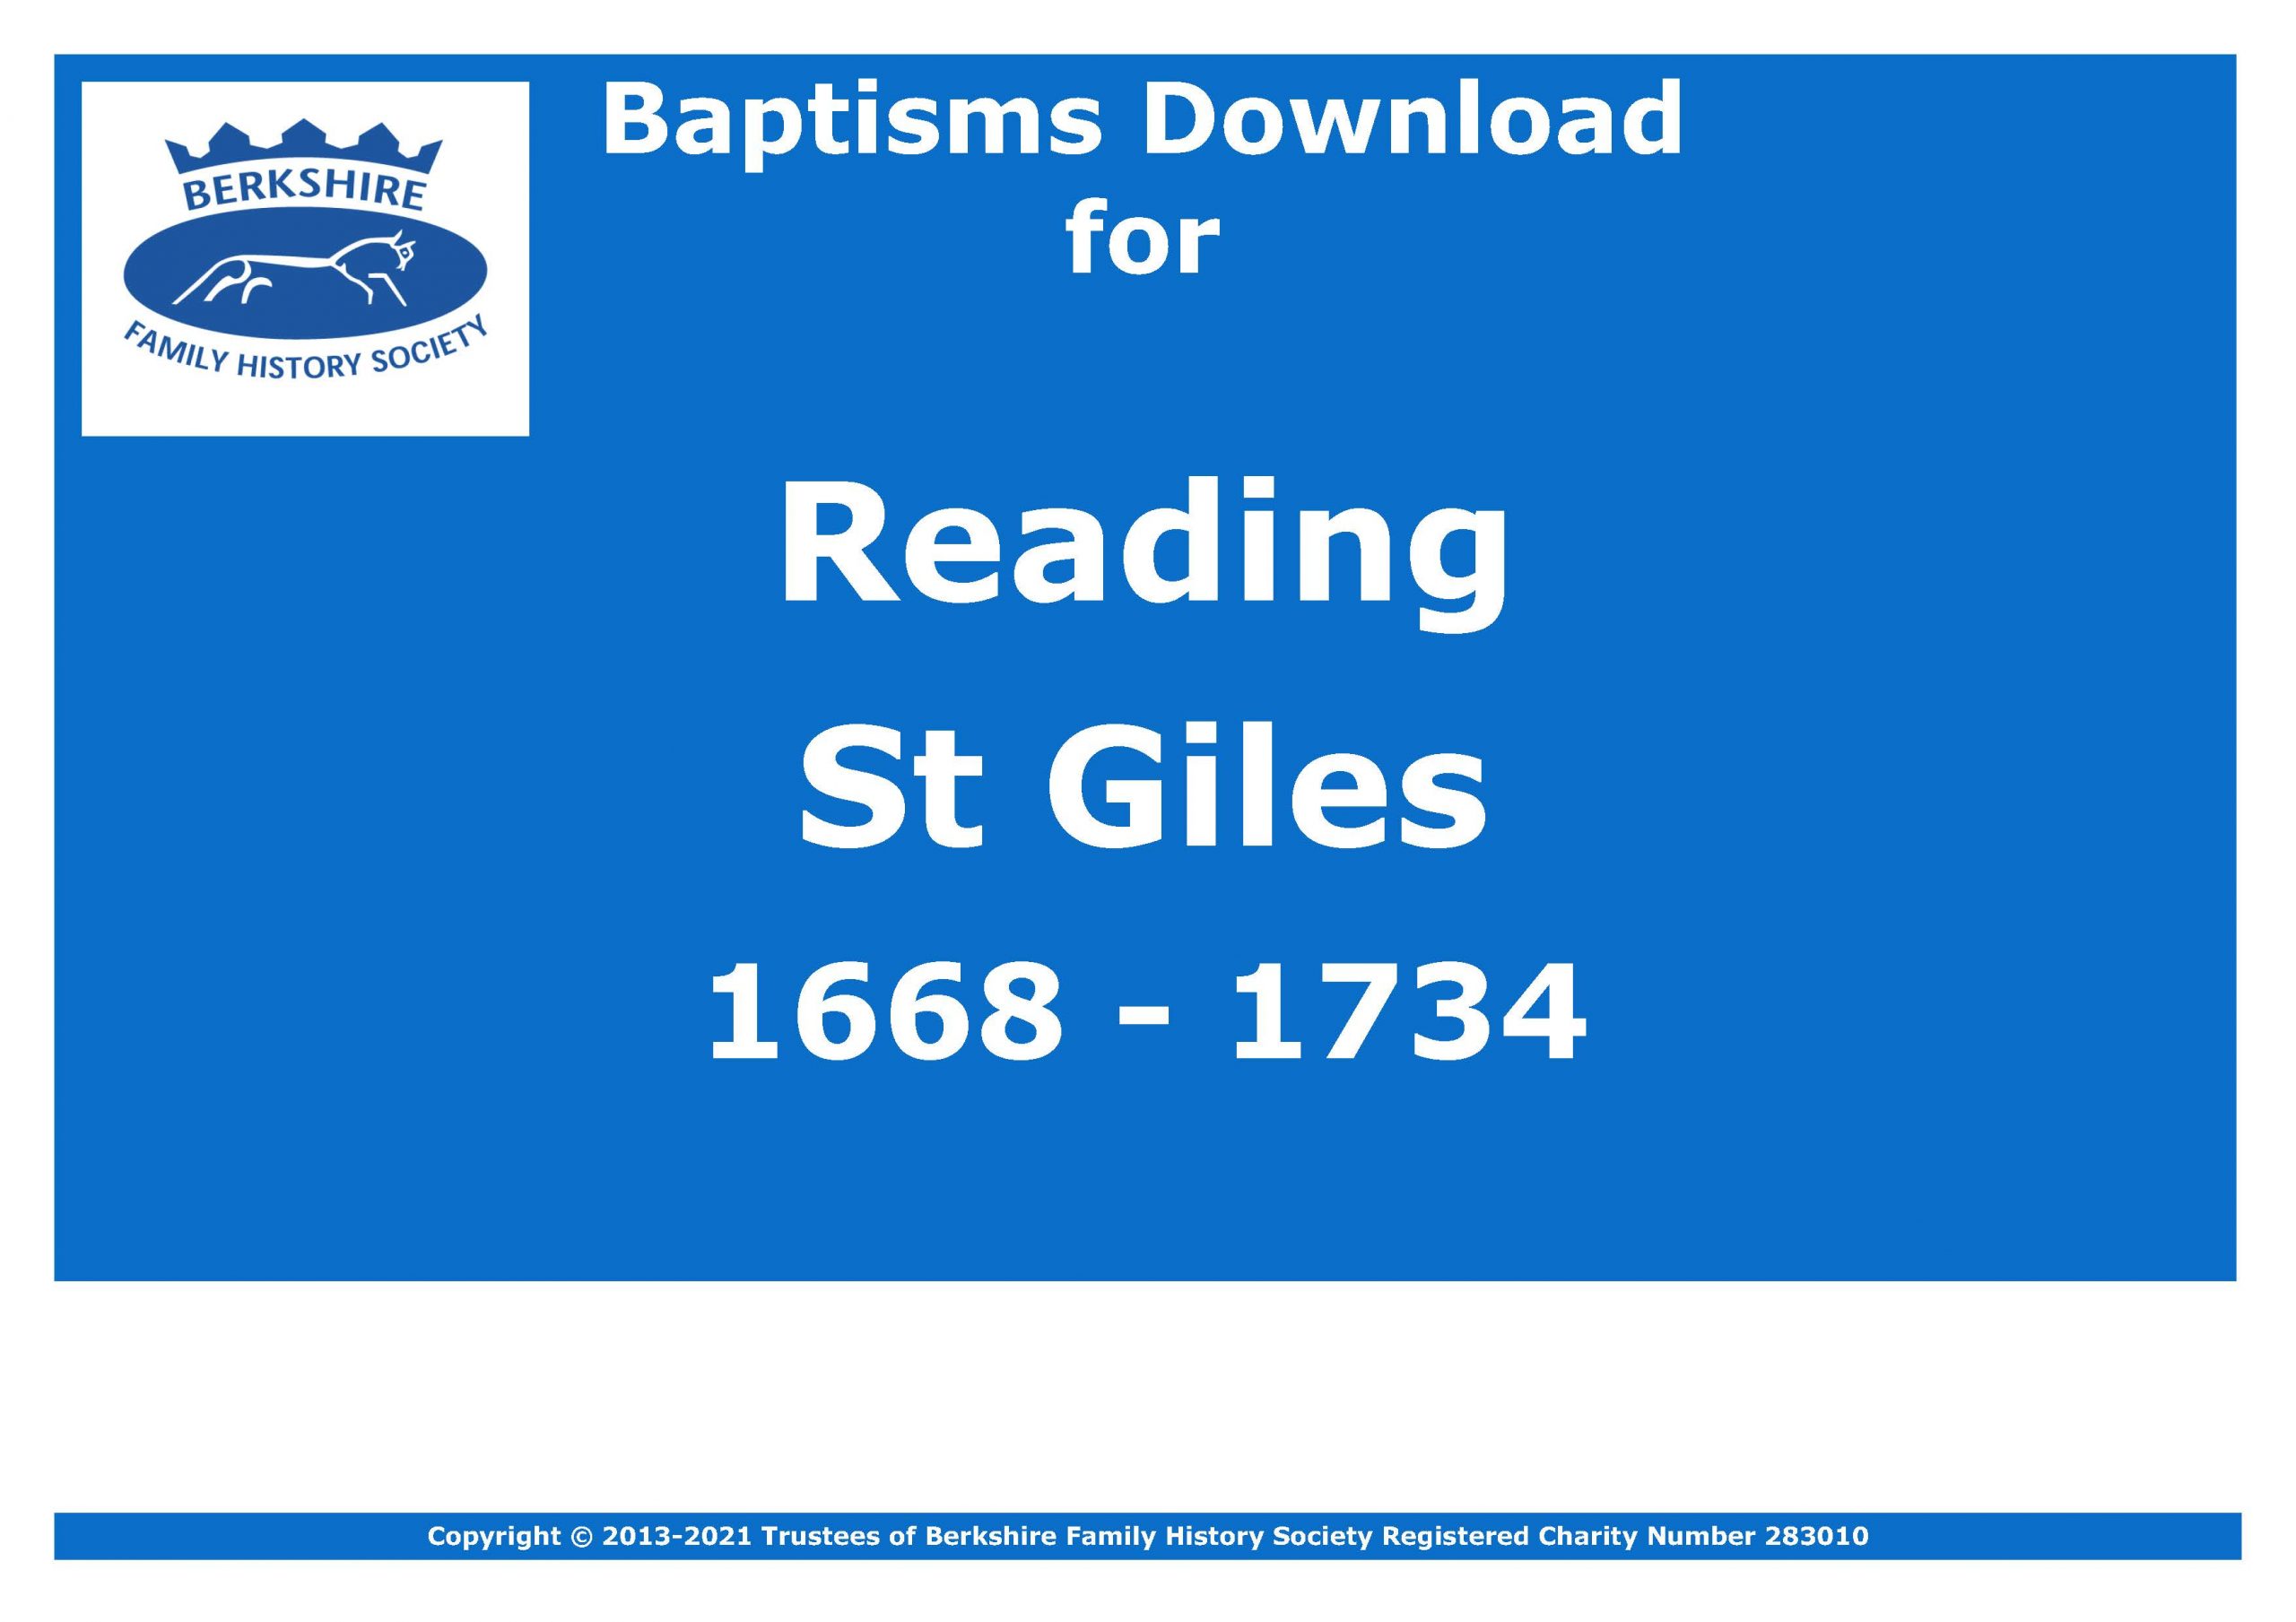 Reading St Giles Baptisms 1668-1734 (Download) D1744 (Part 2 of 7)